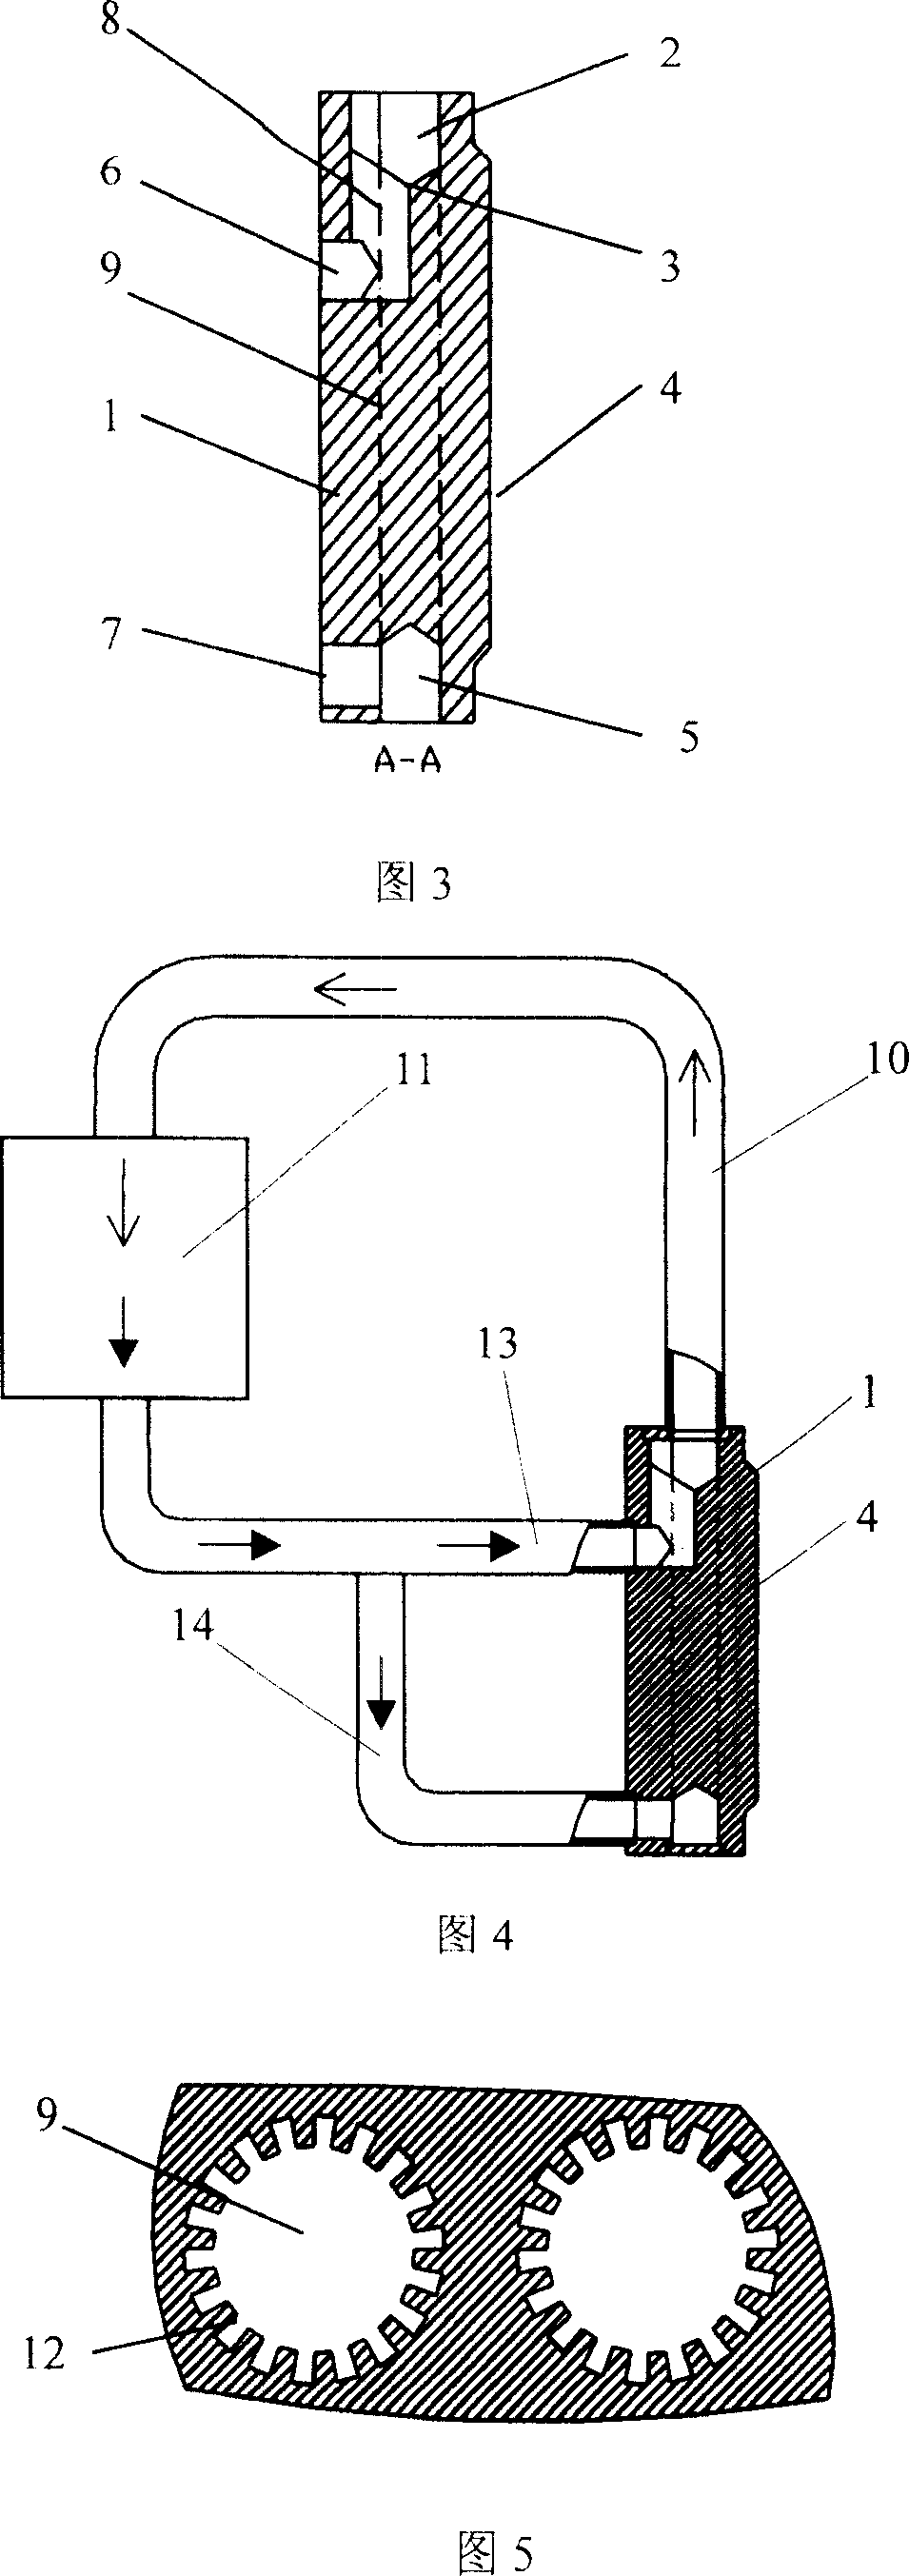 Evaporator for separated heat tube